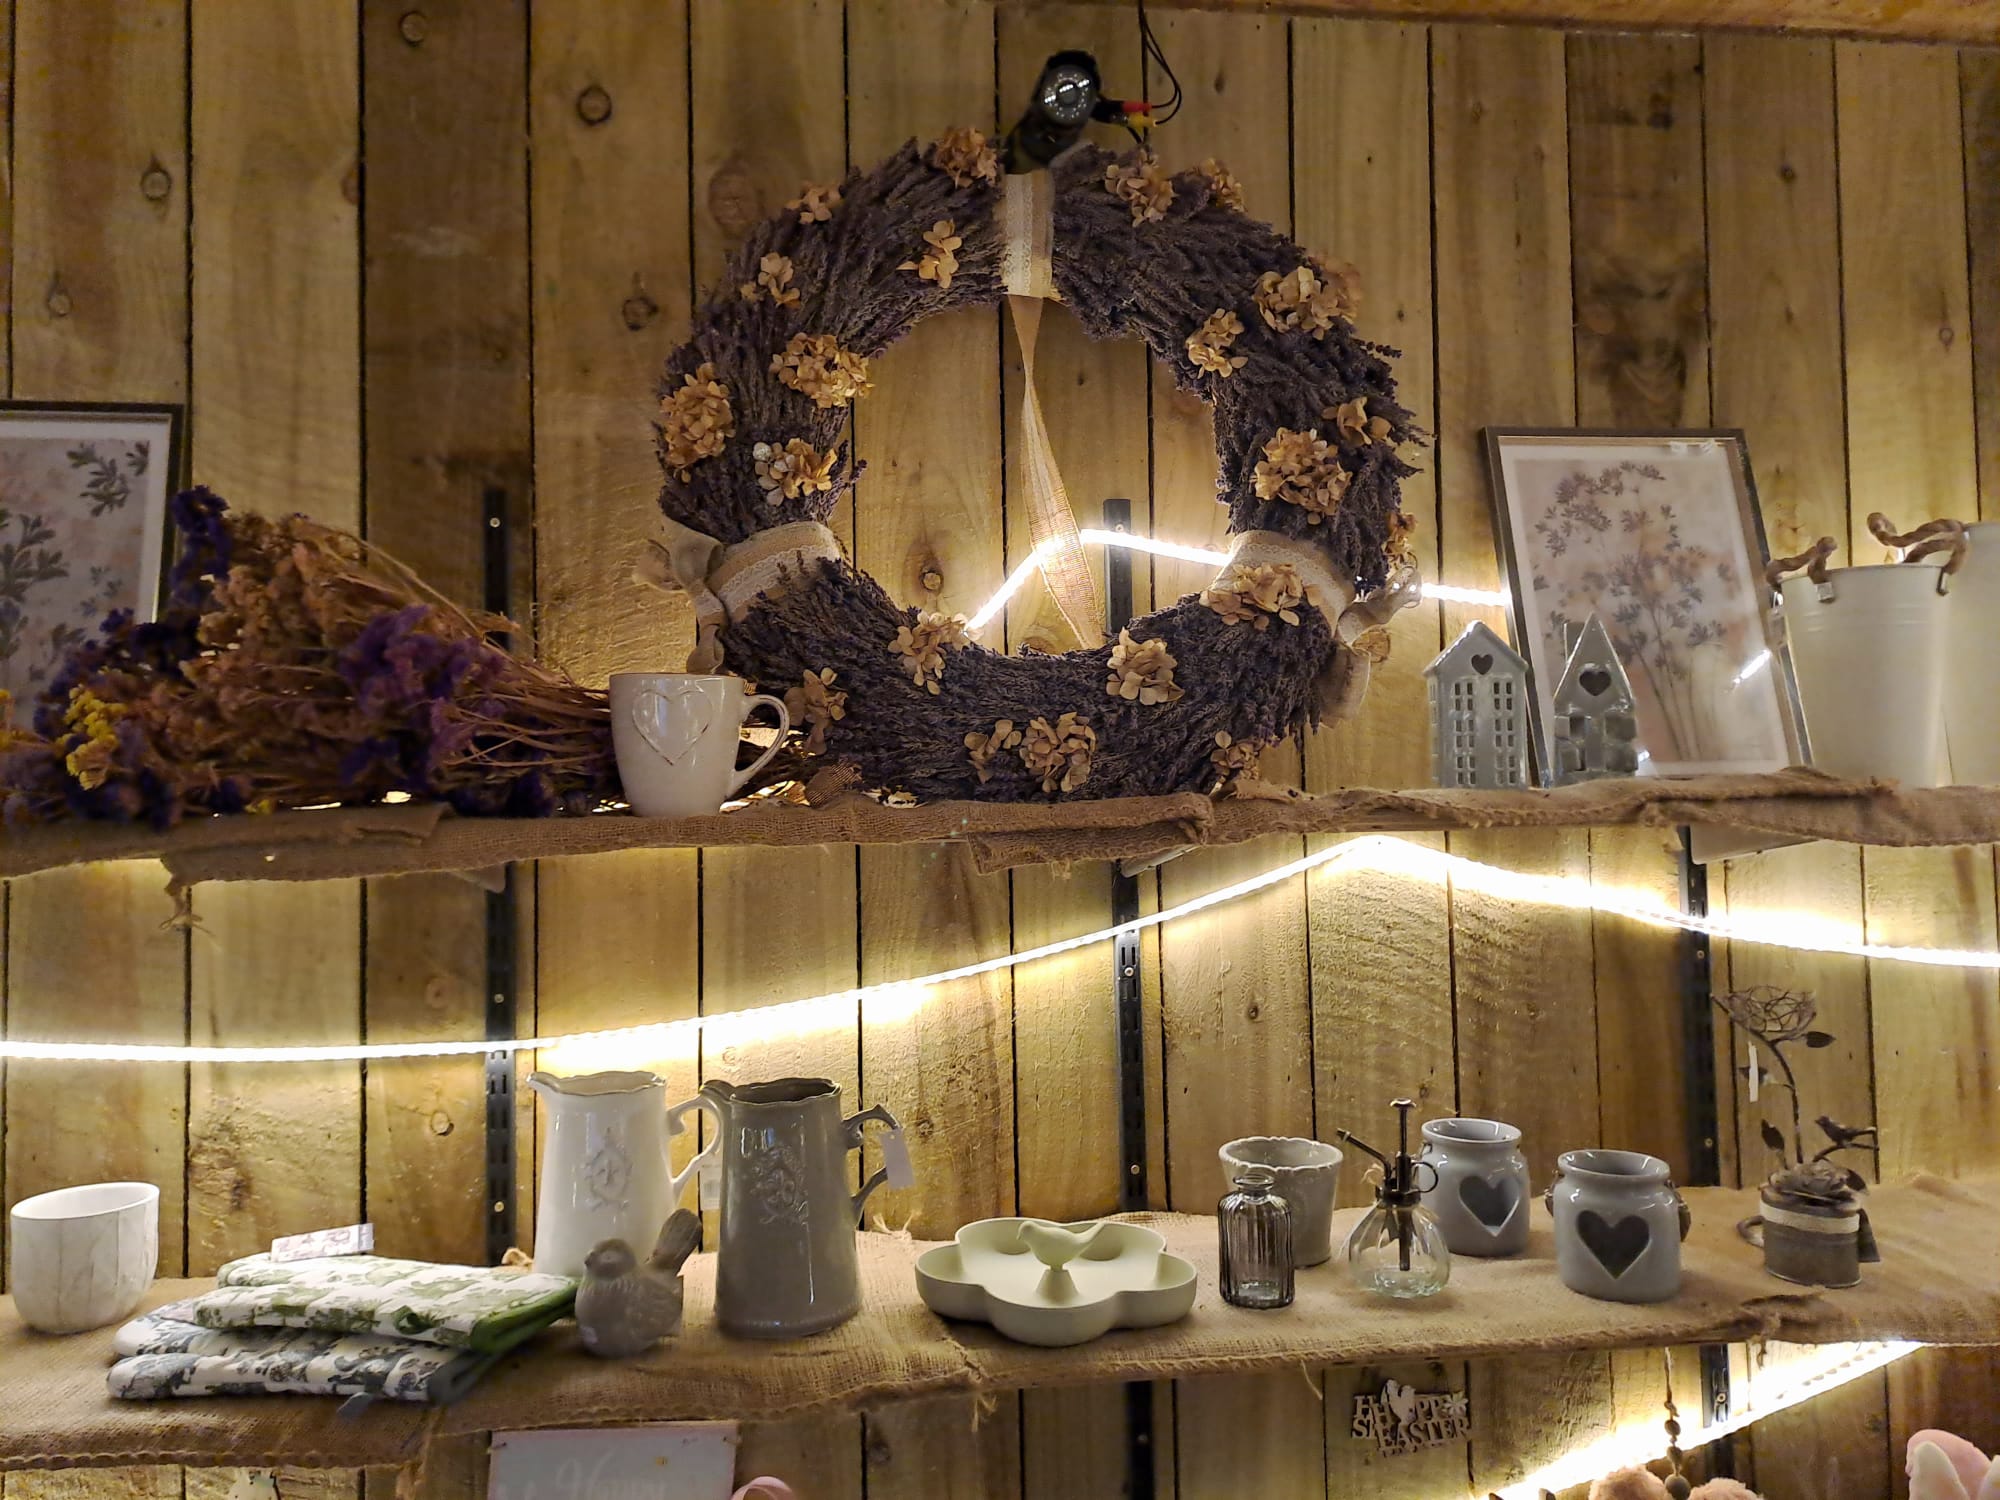 Rustic gift shop items for sale.